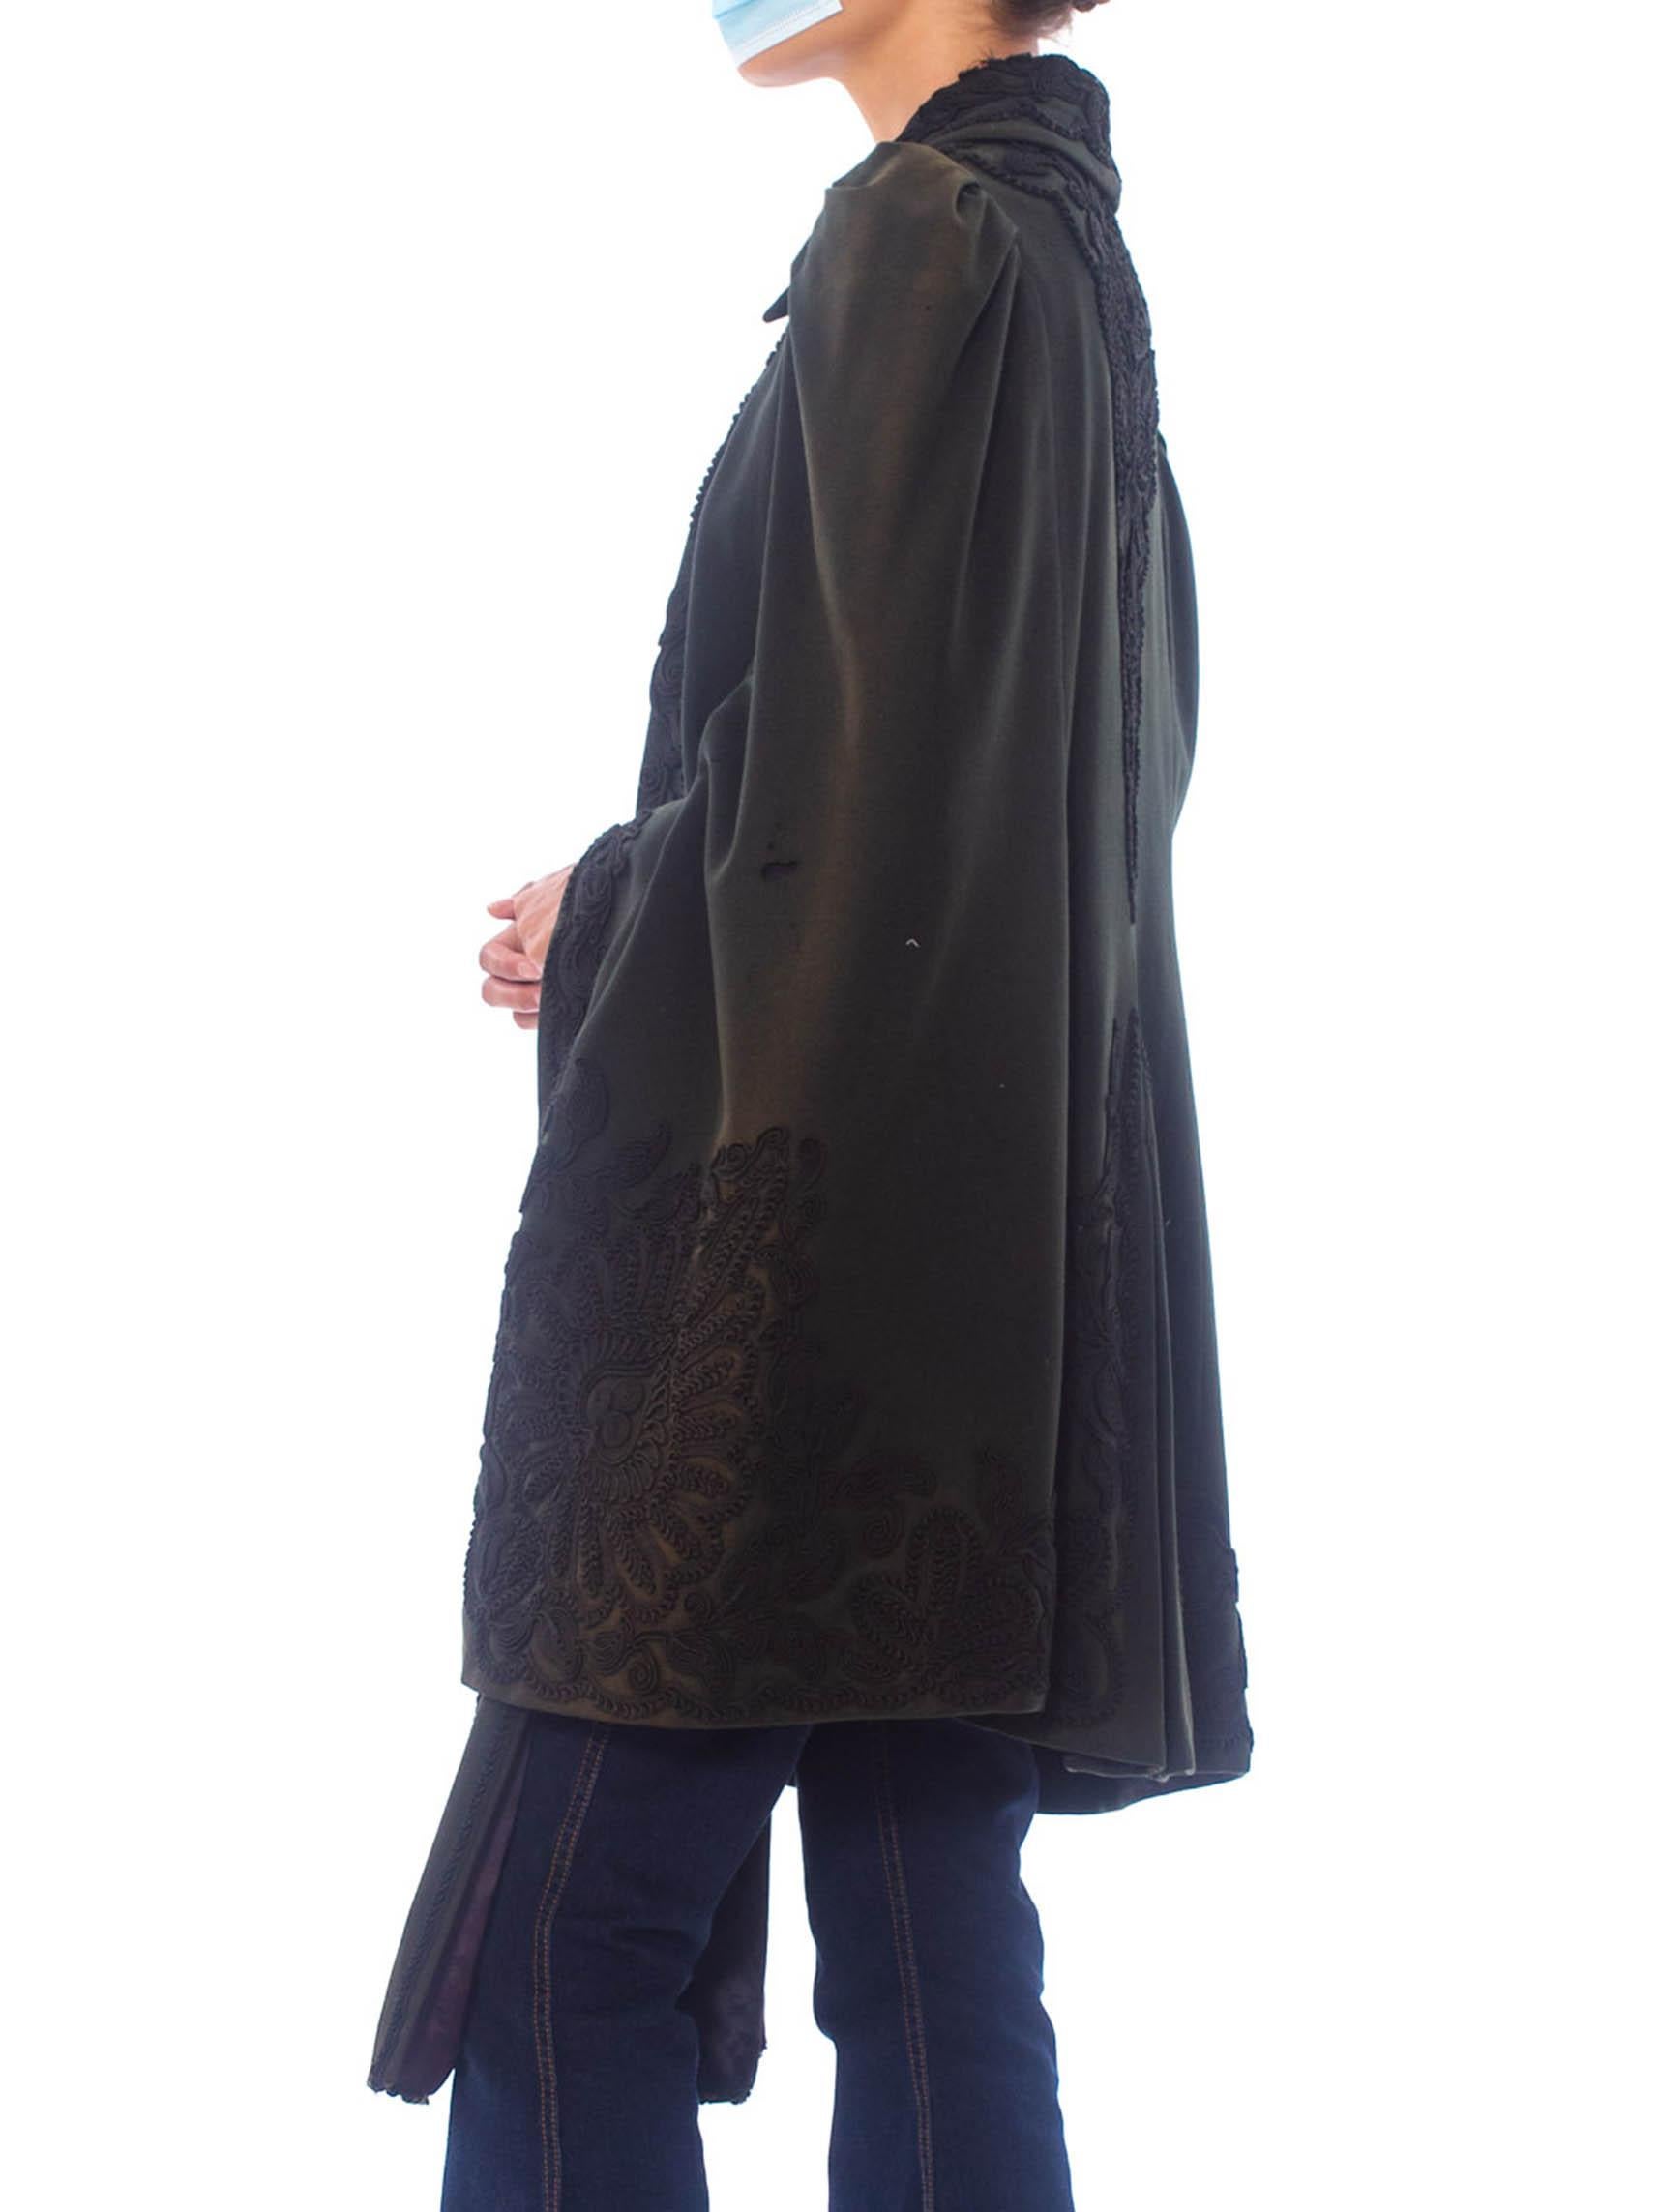 Patina of fading and holes but strong and wearable Victorian Dark Green Wool 1880S 1890S Dolman Cape With Soutache Embroidery 